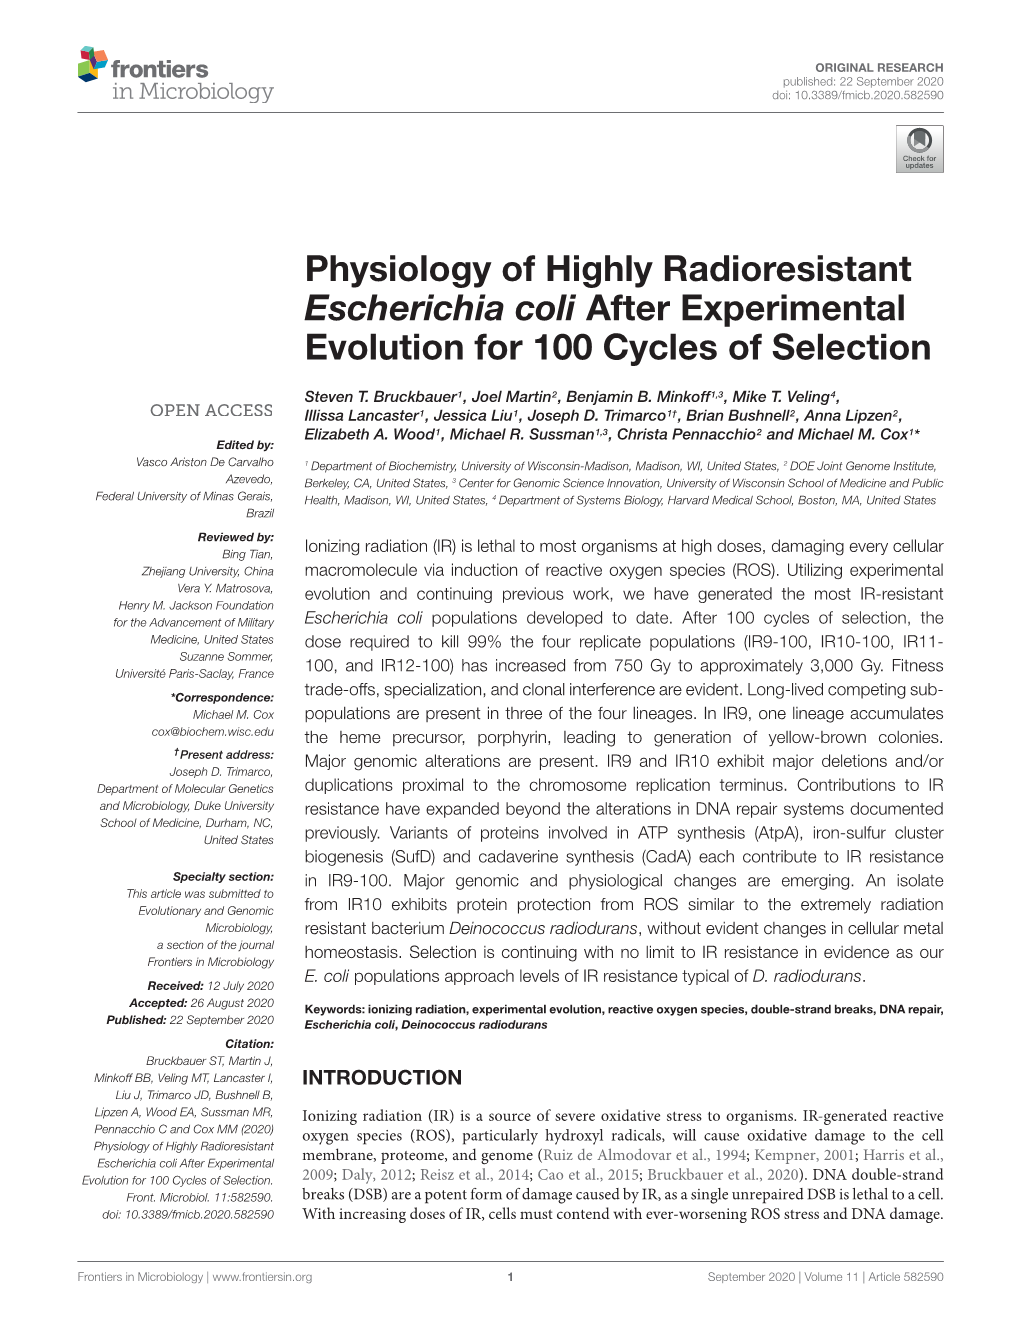 Physiology of Highly Radioresistant Escherichia Coli After Experimental Evolution for 100 Cycles of Selection